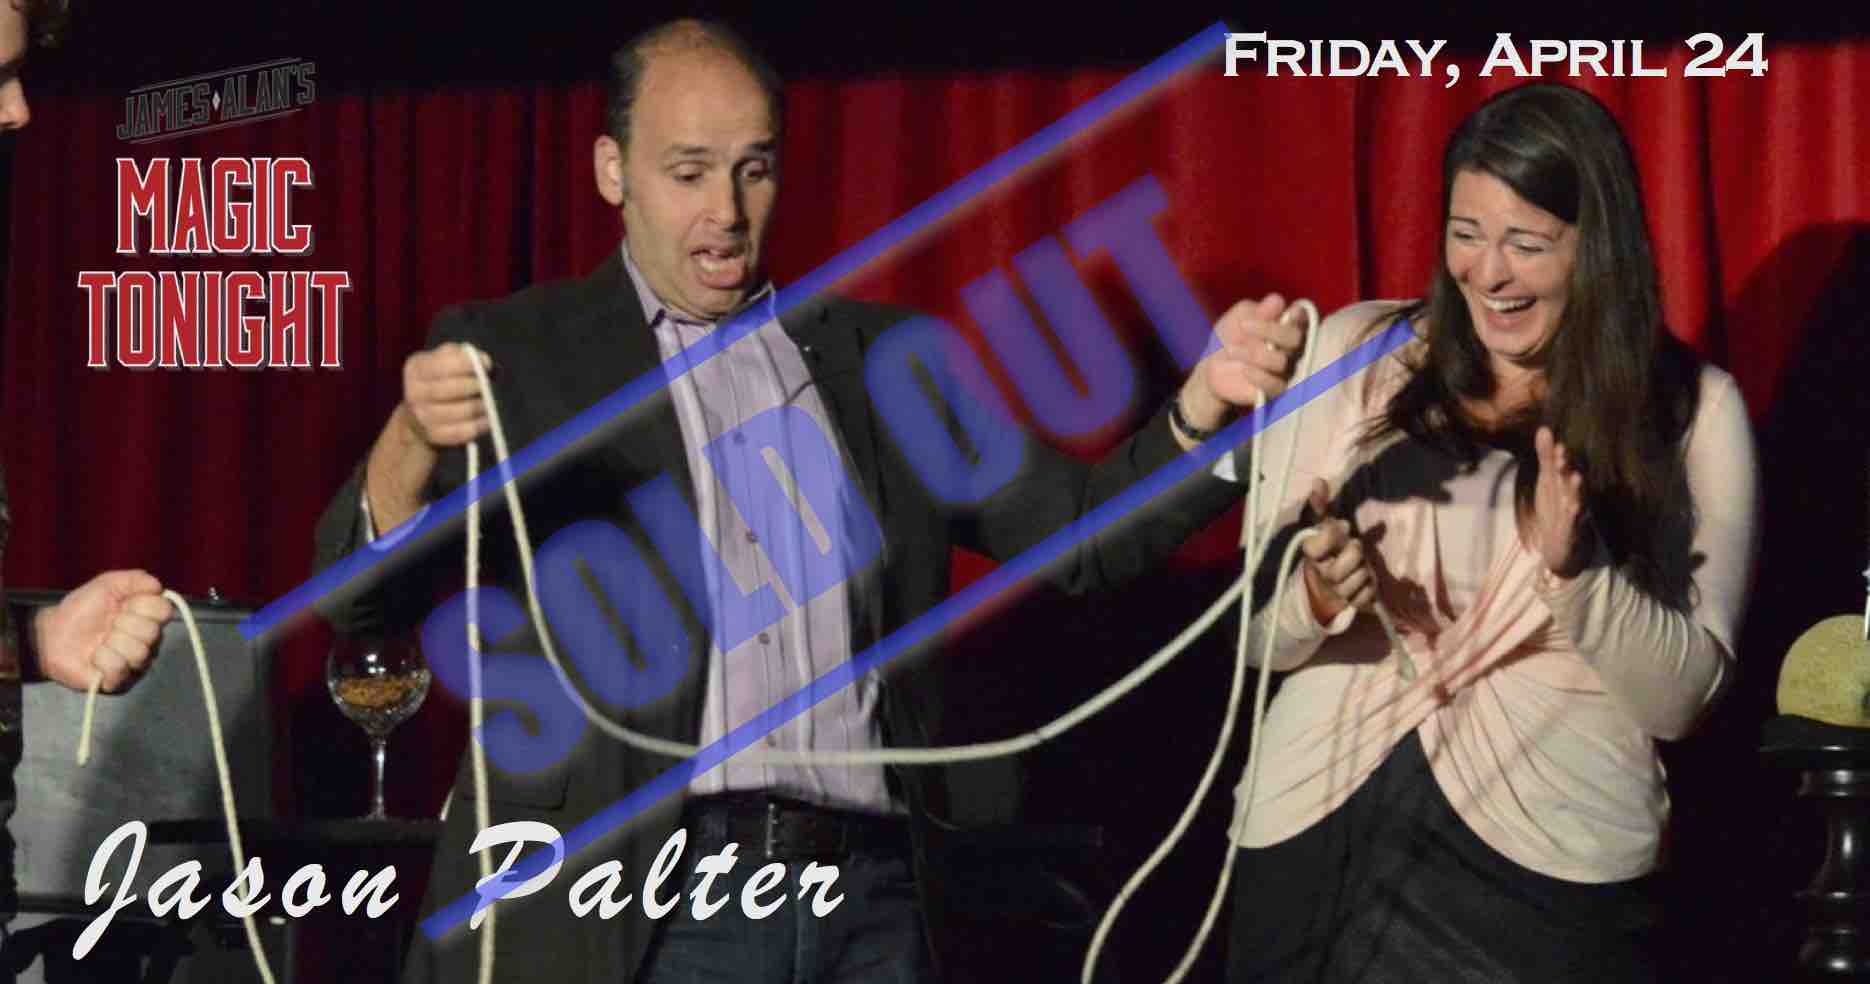 Apr 24 Jason Palter sold out